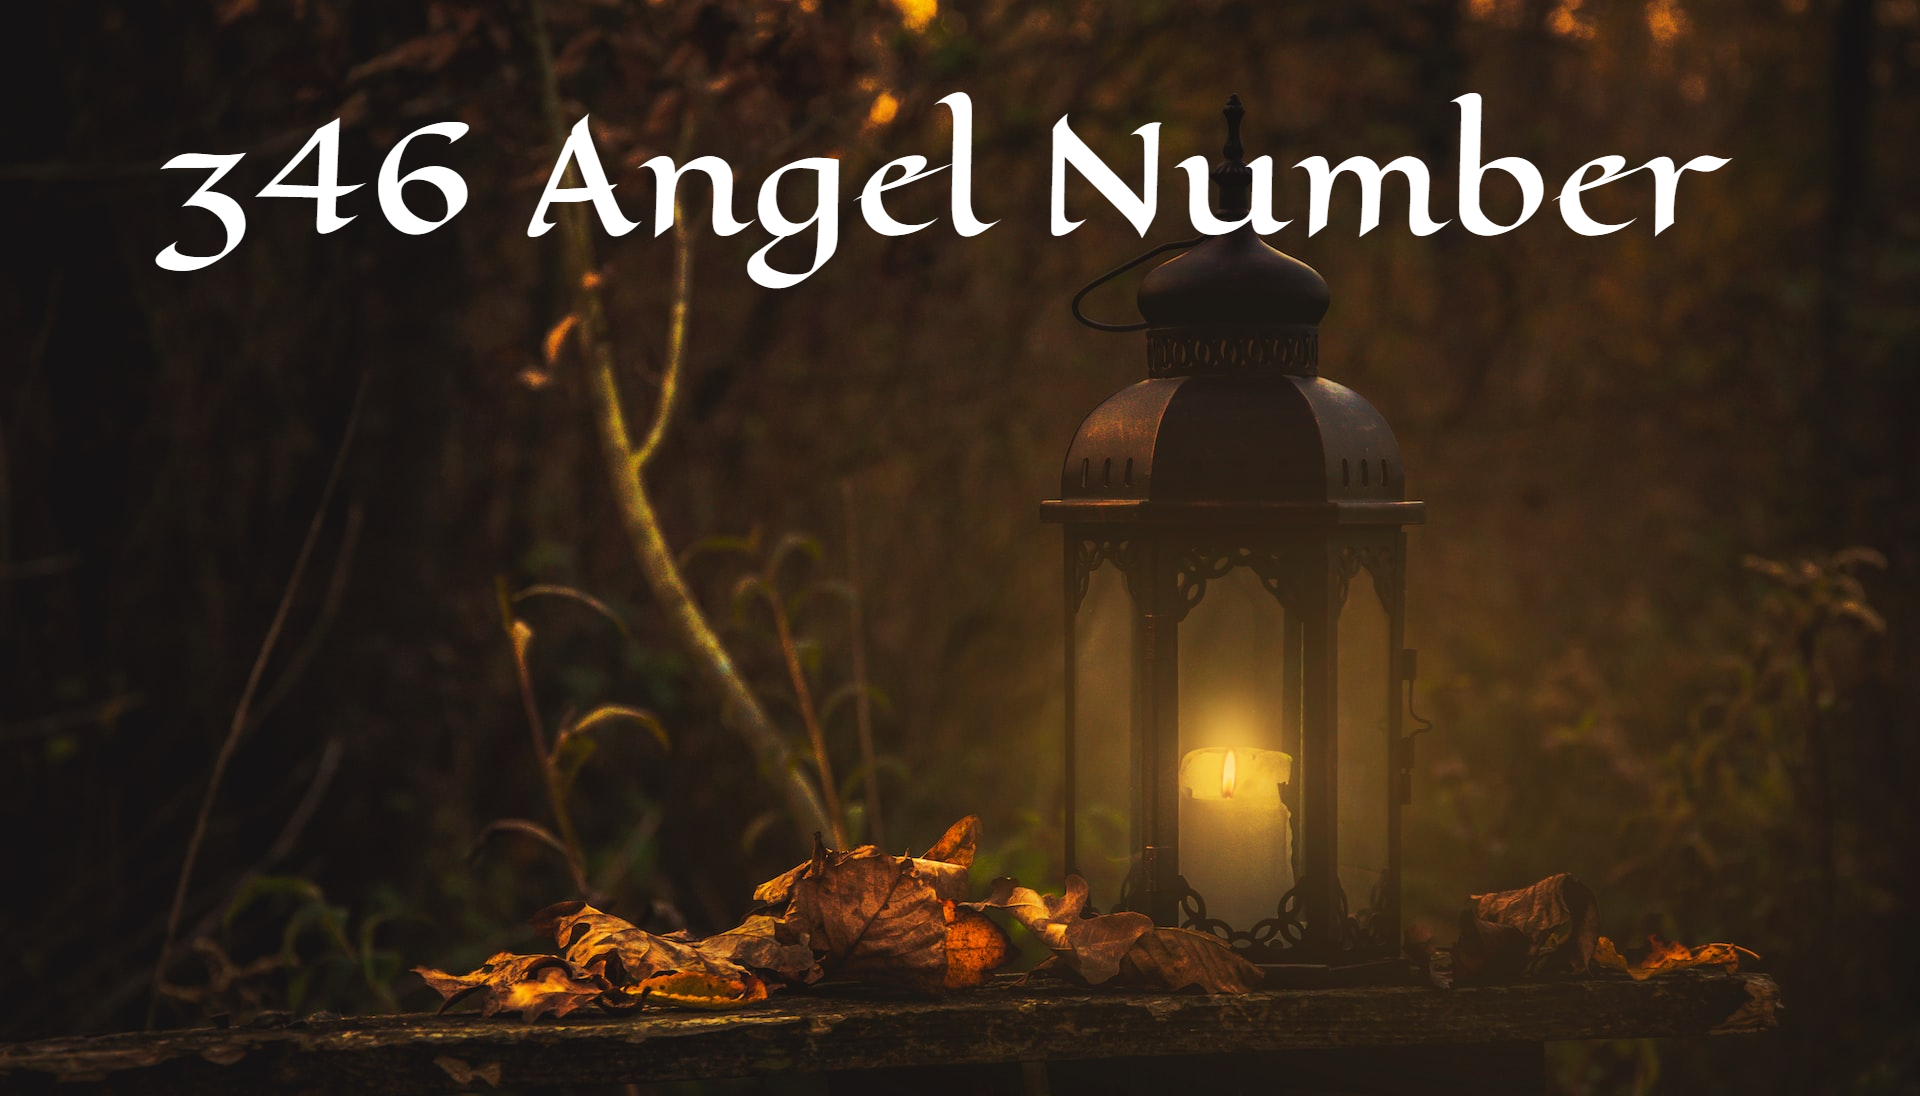 346 Angel Number Meaning - Fears And Insecurities